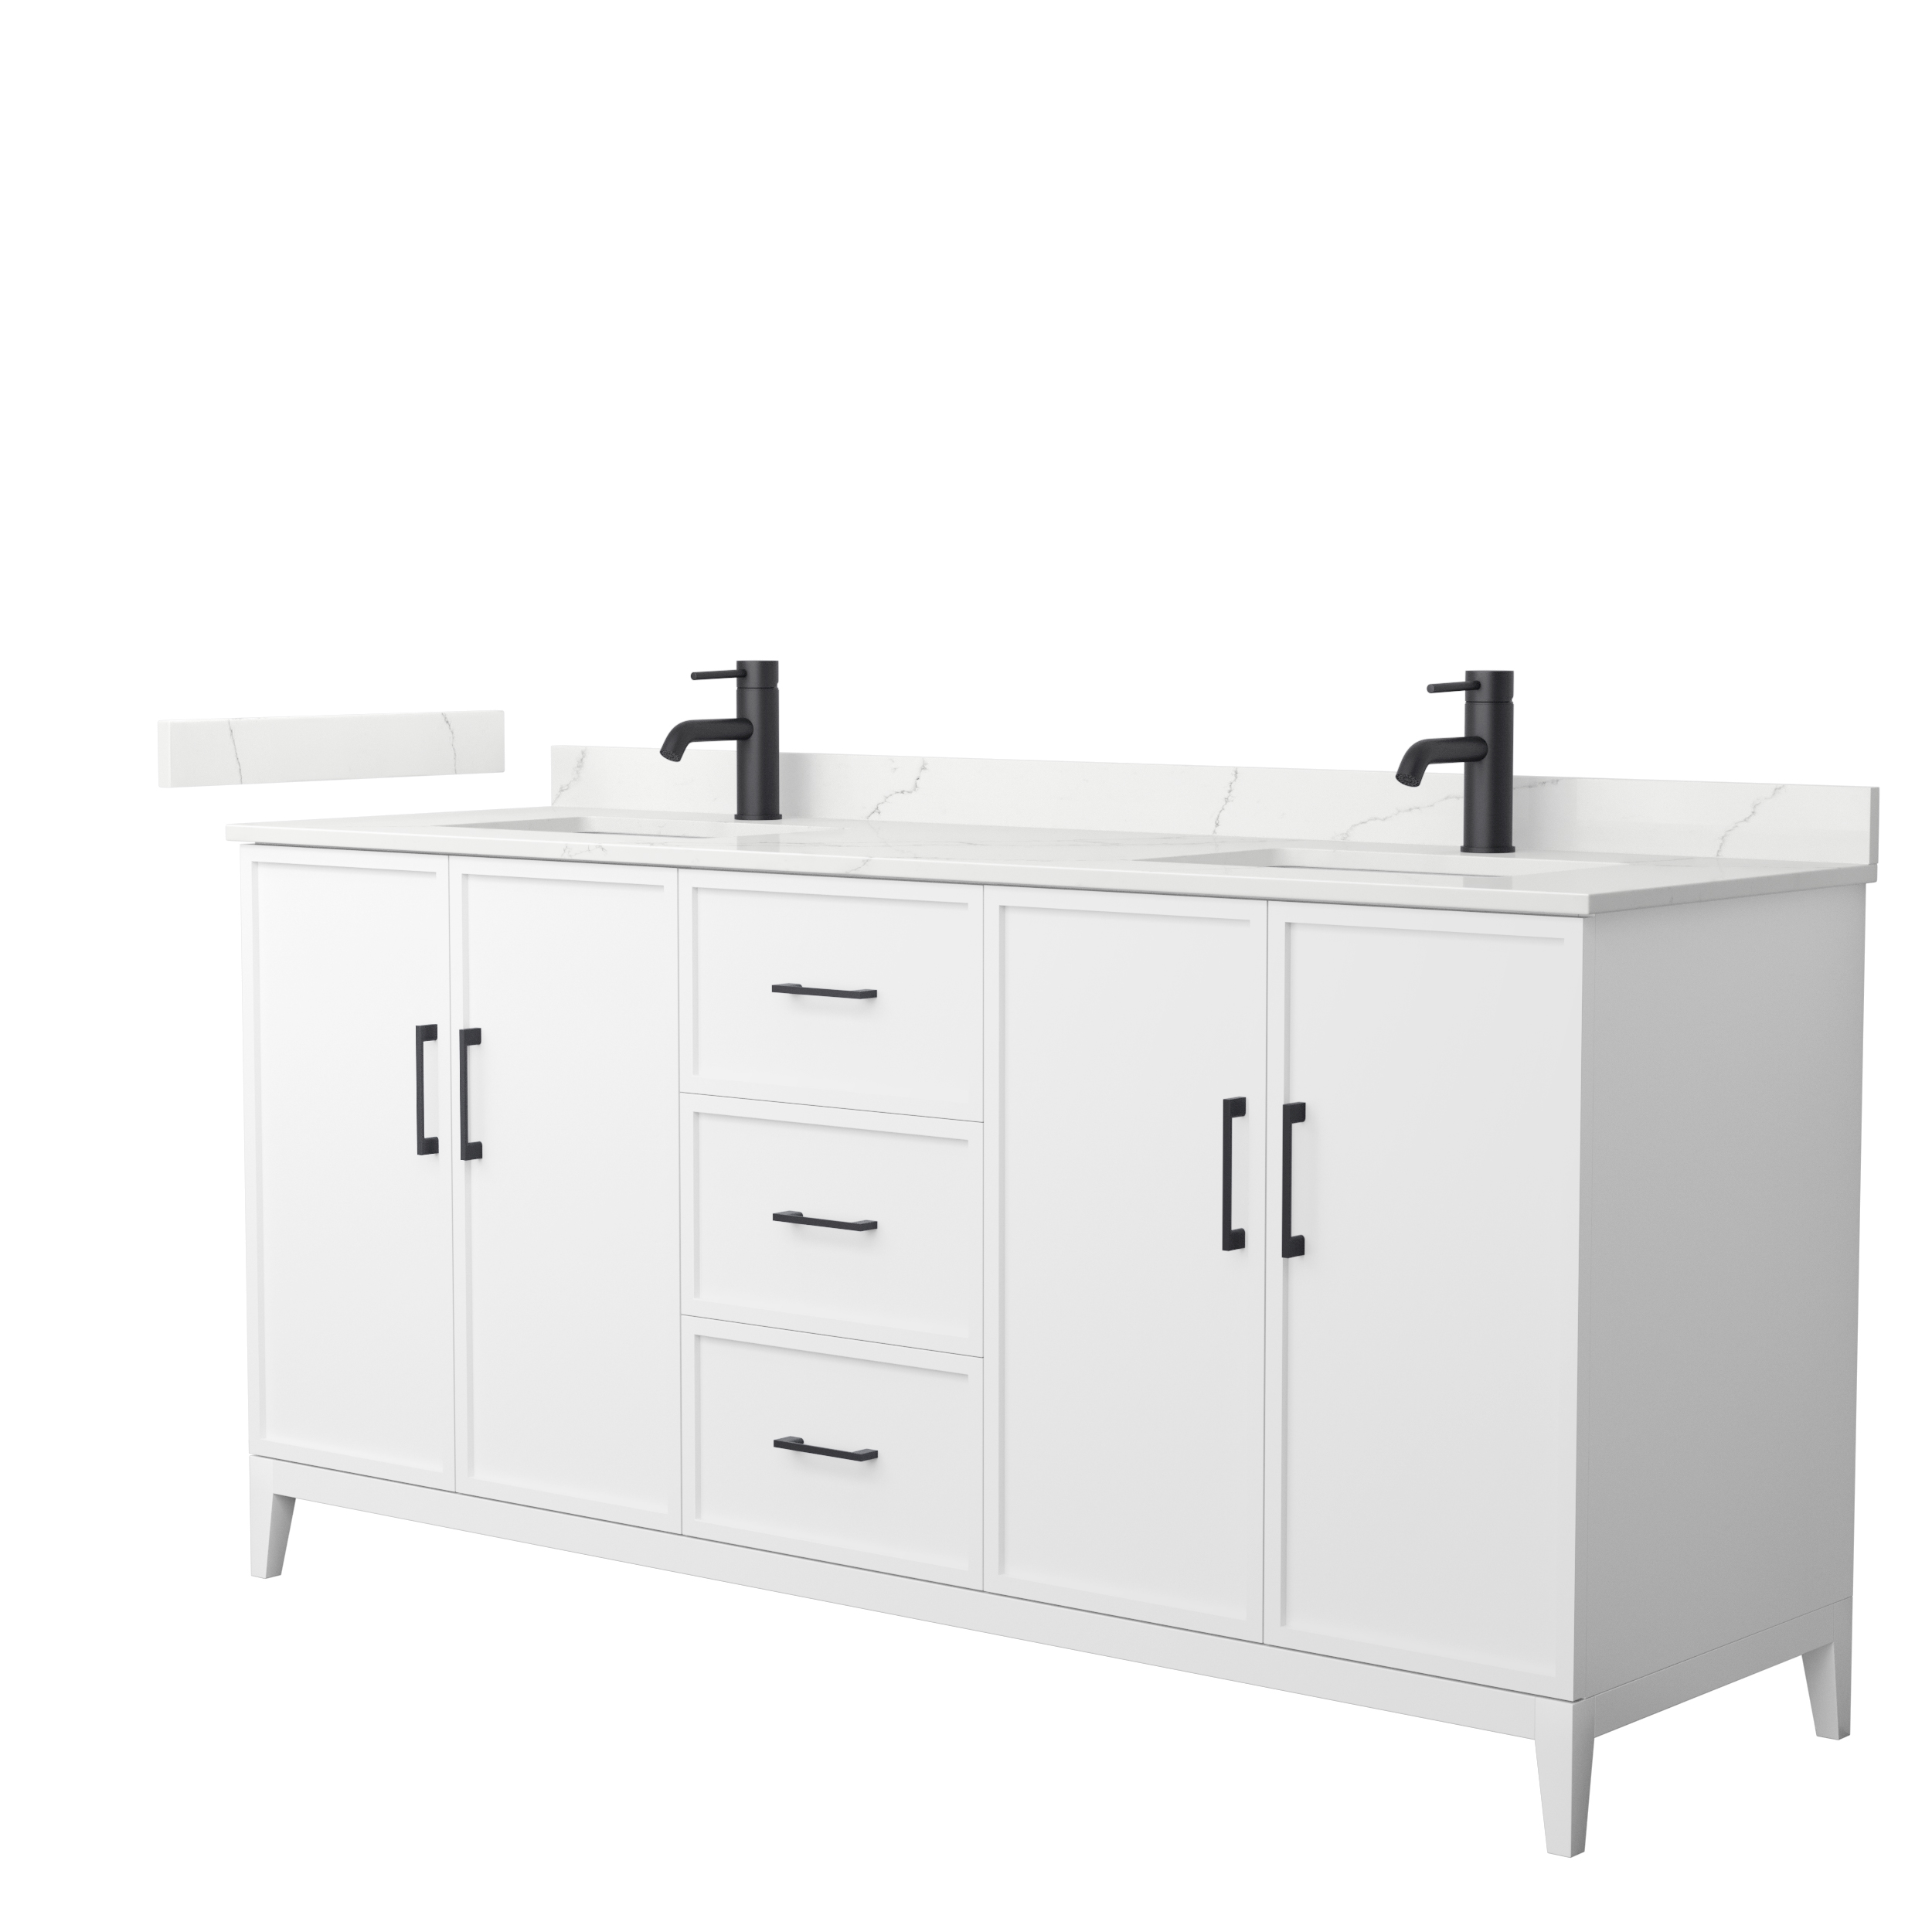 elan 72" double bathroom vanity by wyndham collection - white